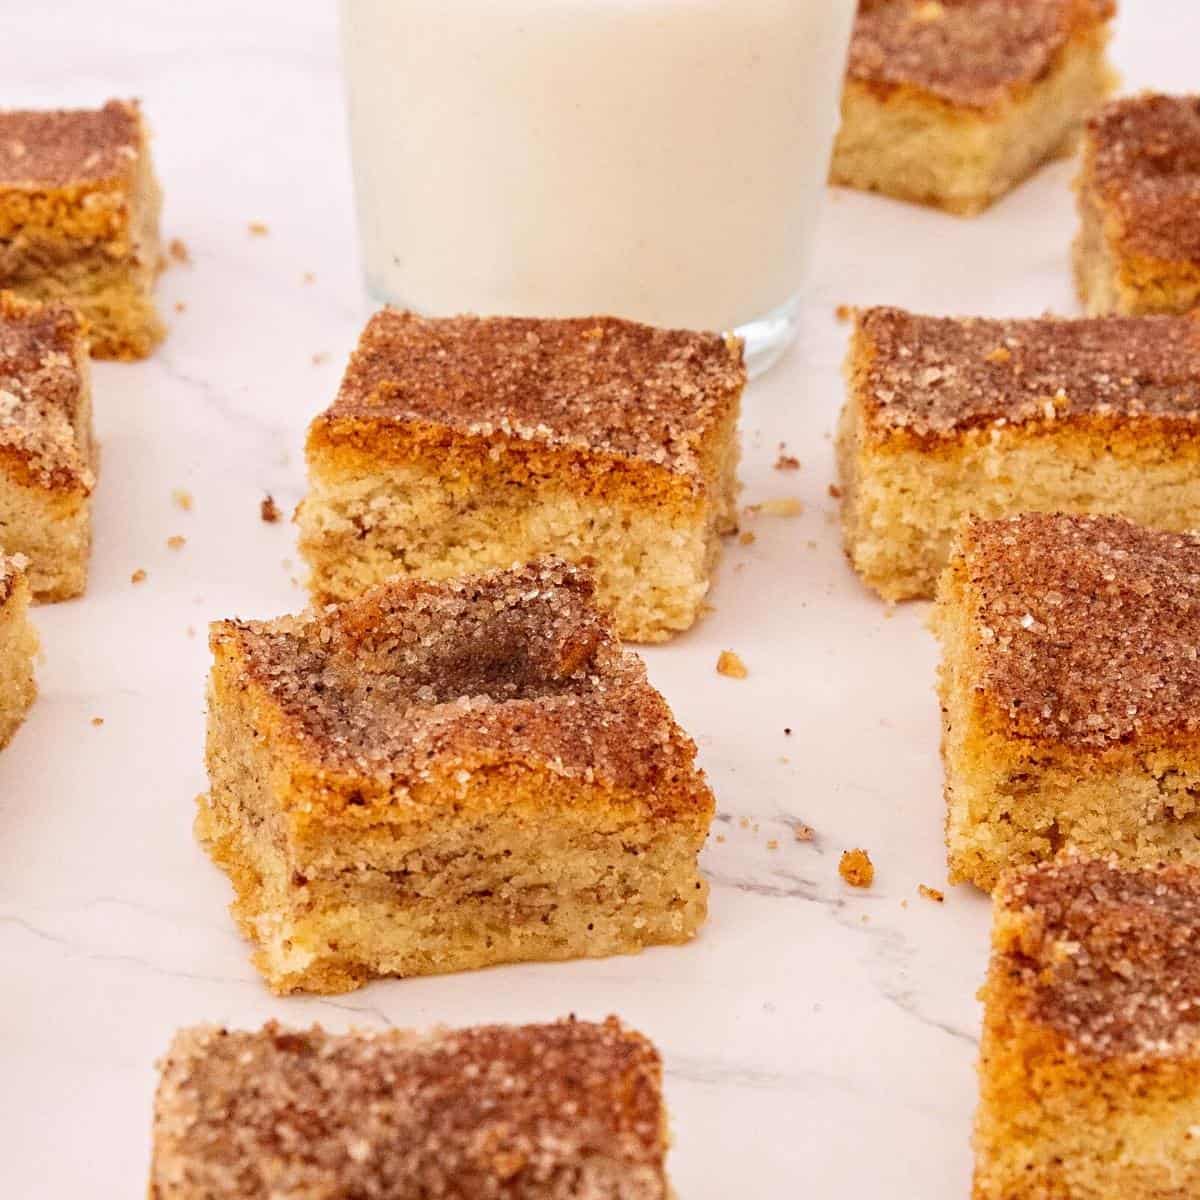 Snickerdoodle bars on the table.